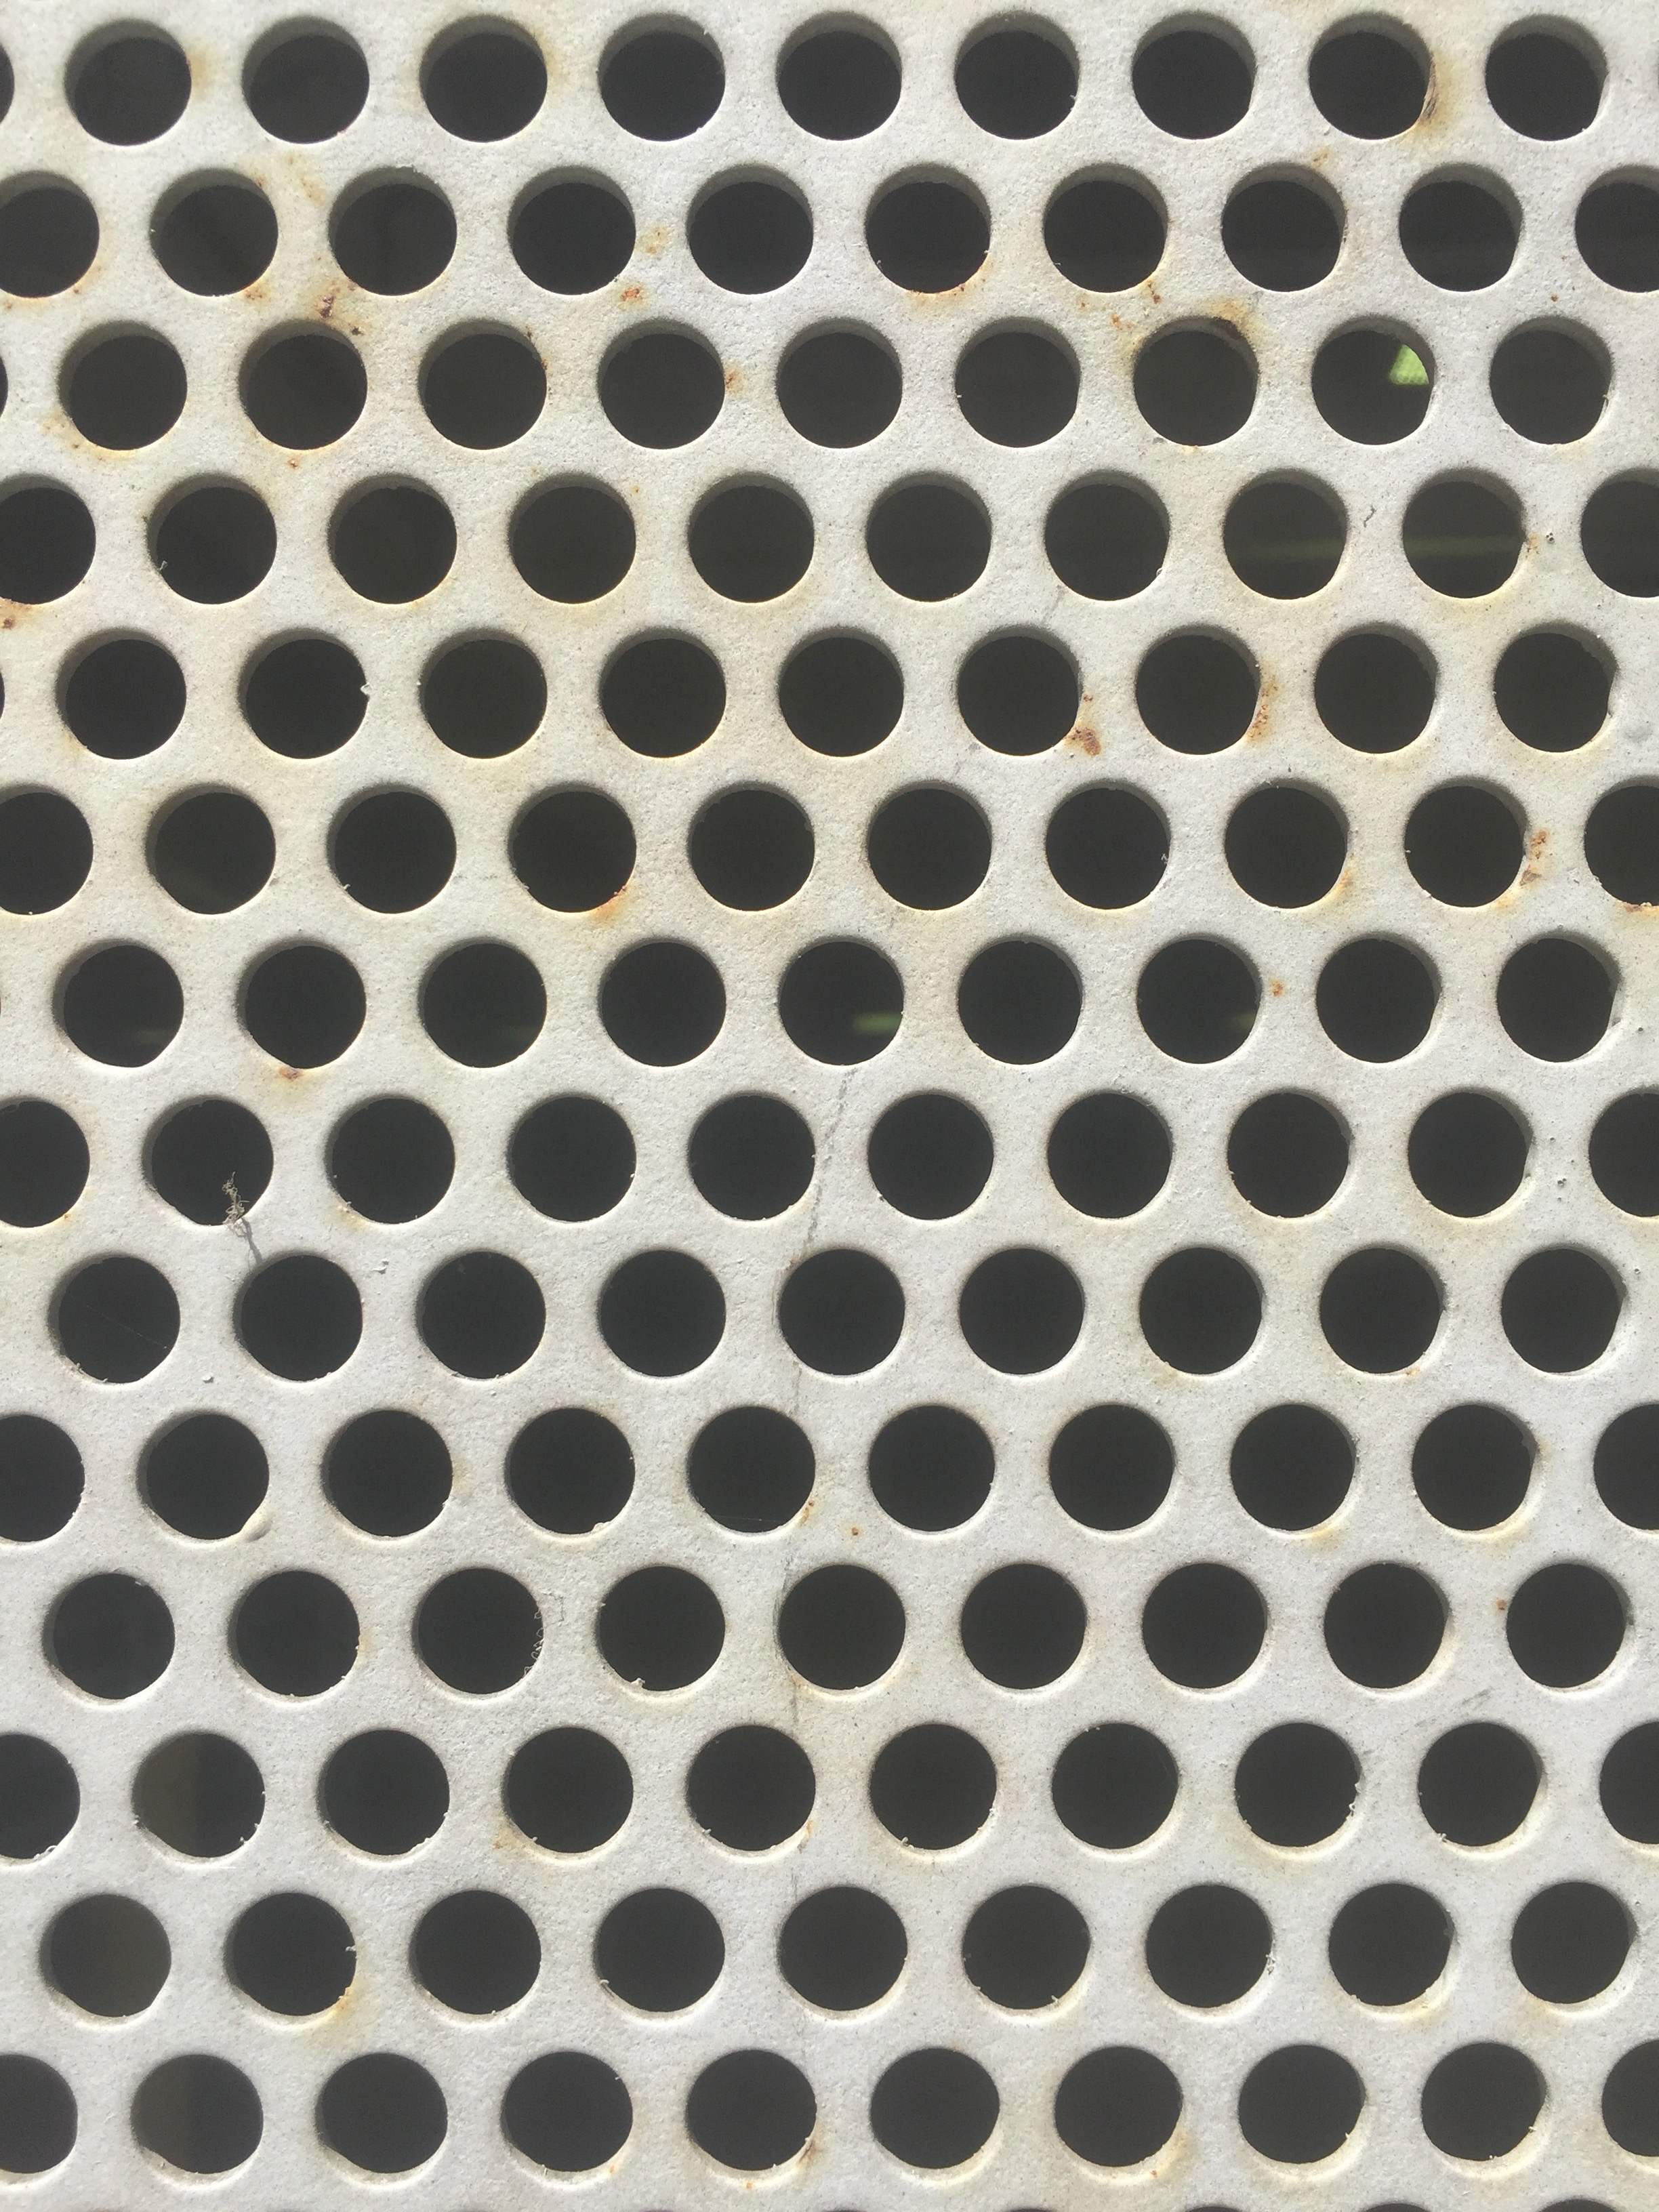 White Steel Mesh Screen Background Seamless And Texture Stock